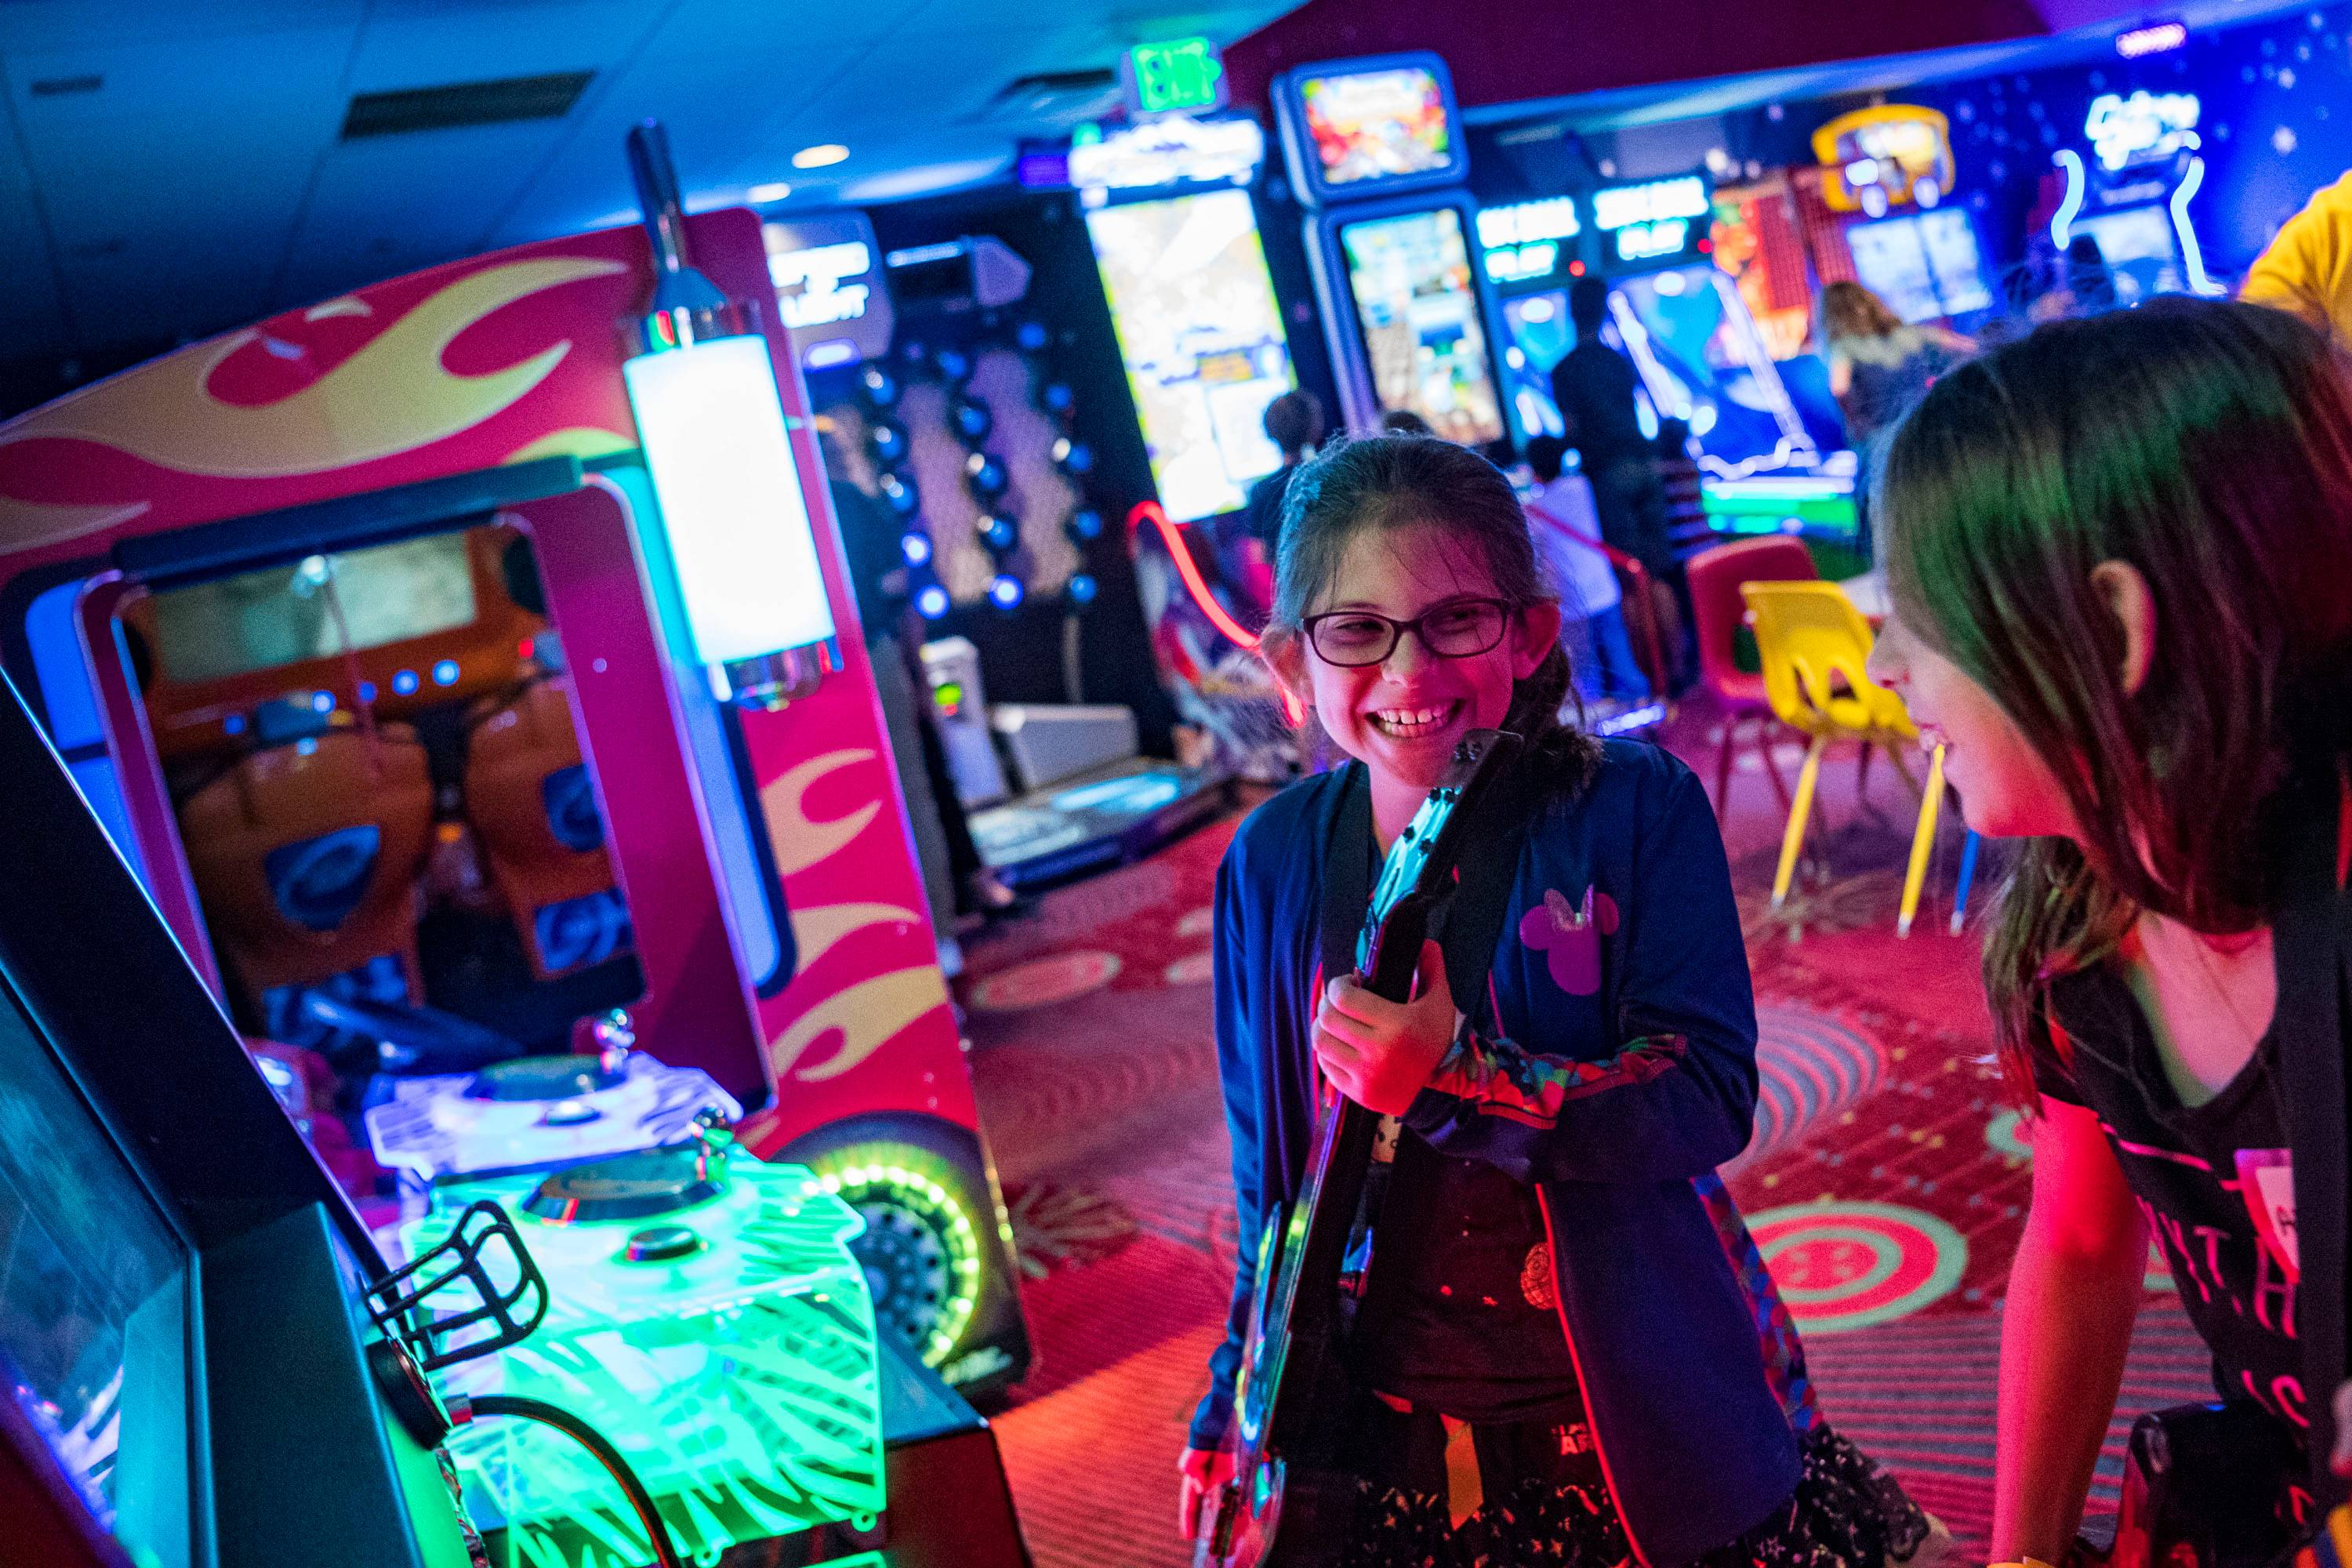 PHOTOS - A look inside Pixar Play Zone, now open at Disney's Contemporary Resort